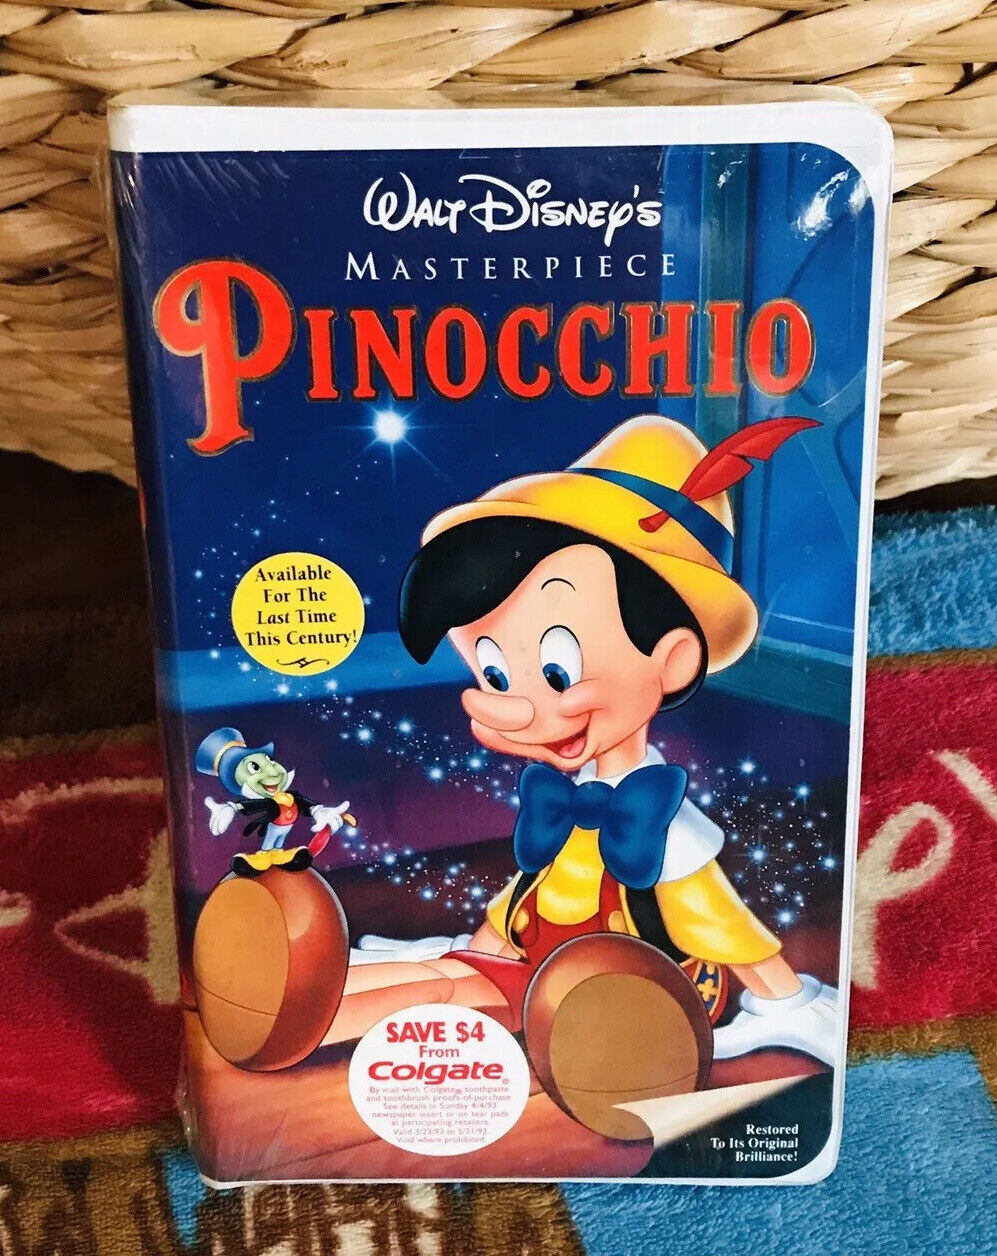 Disney Pinocchio Original SEALED NEW Vintage VHS VCR Tape Masterpiece Collection